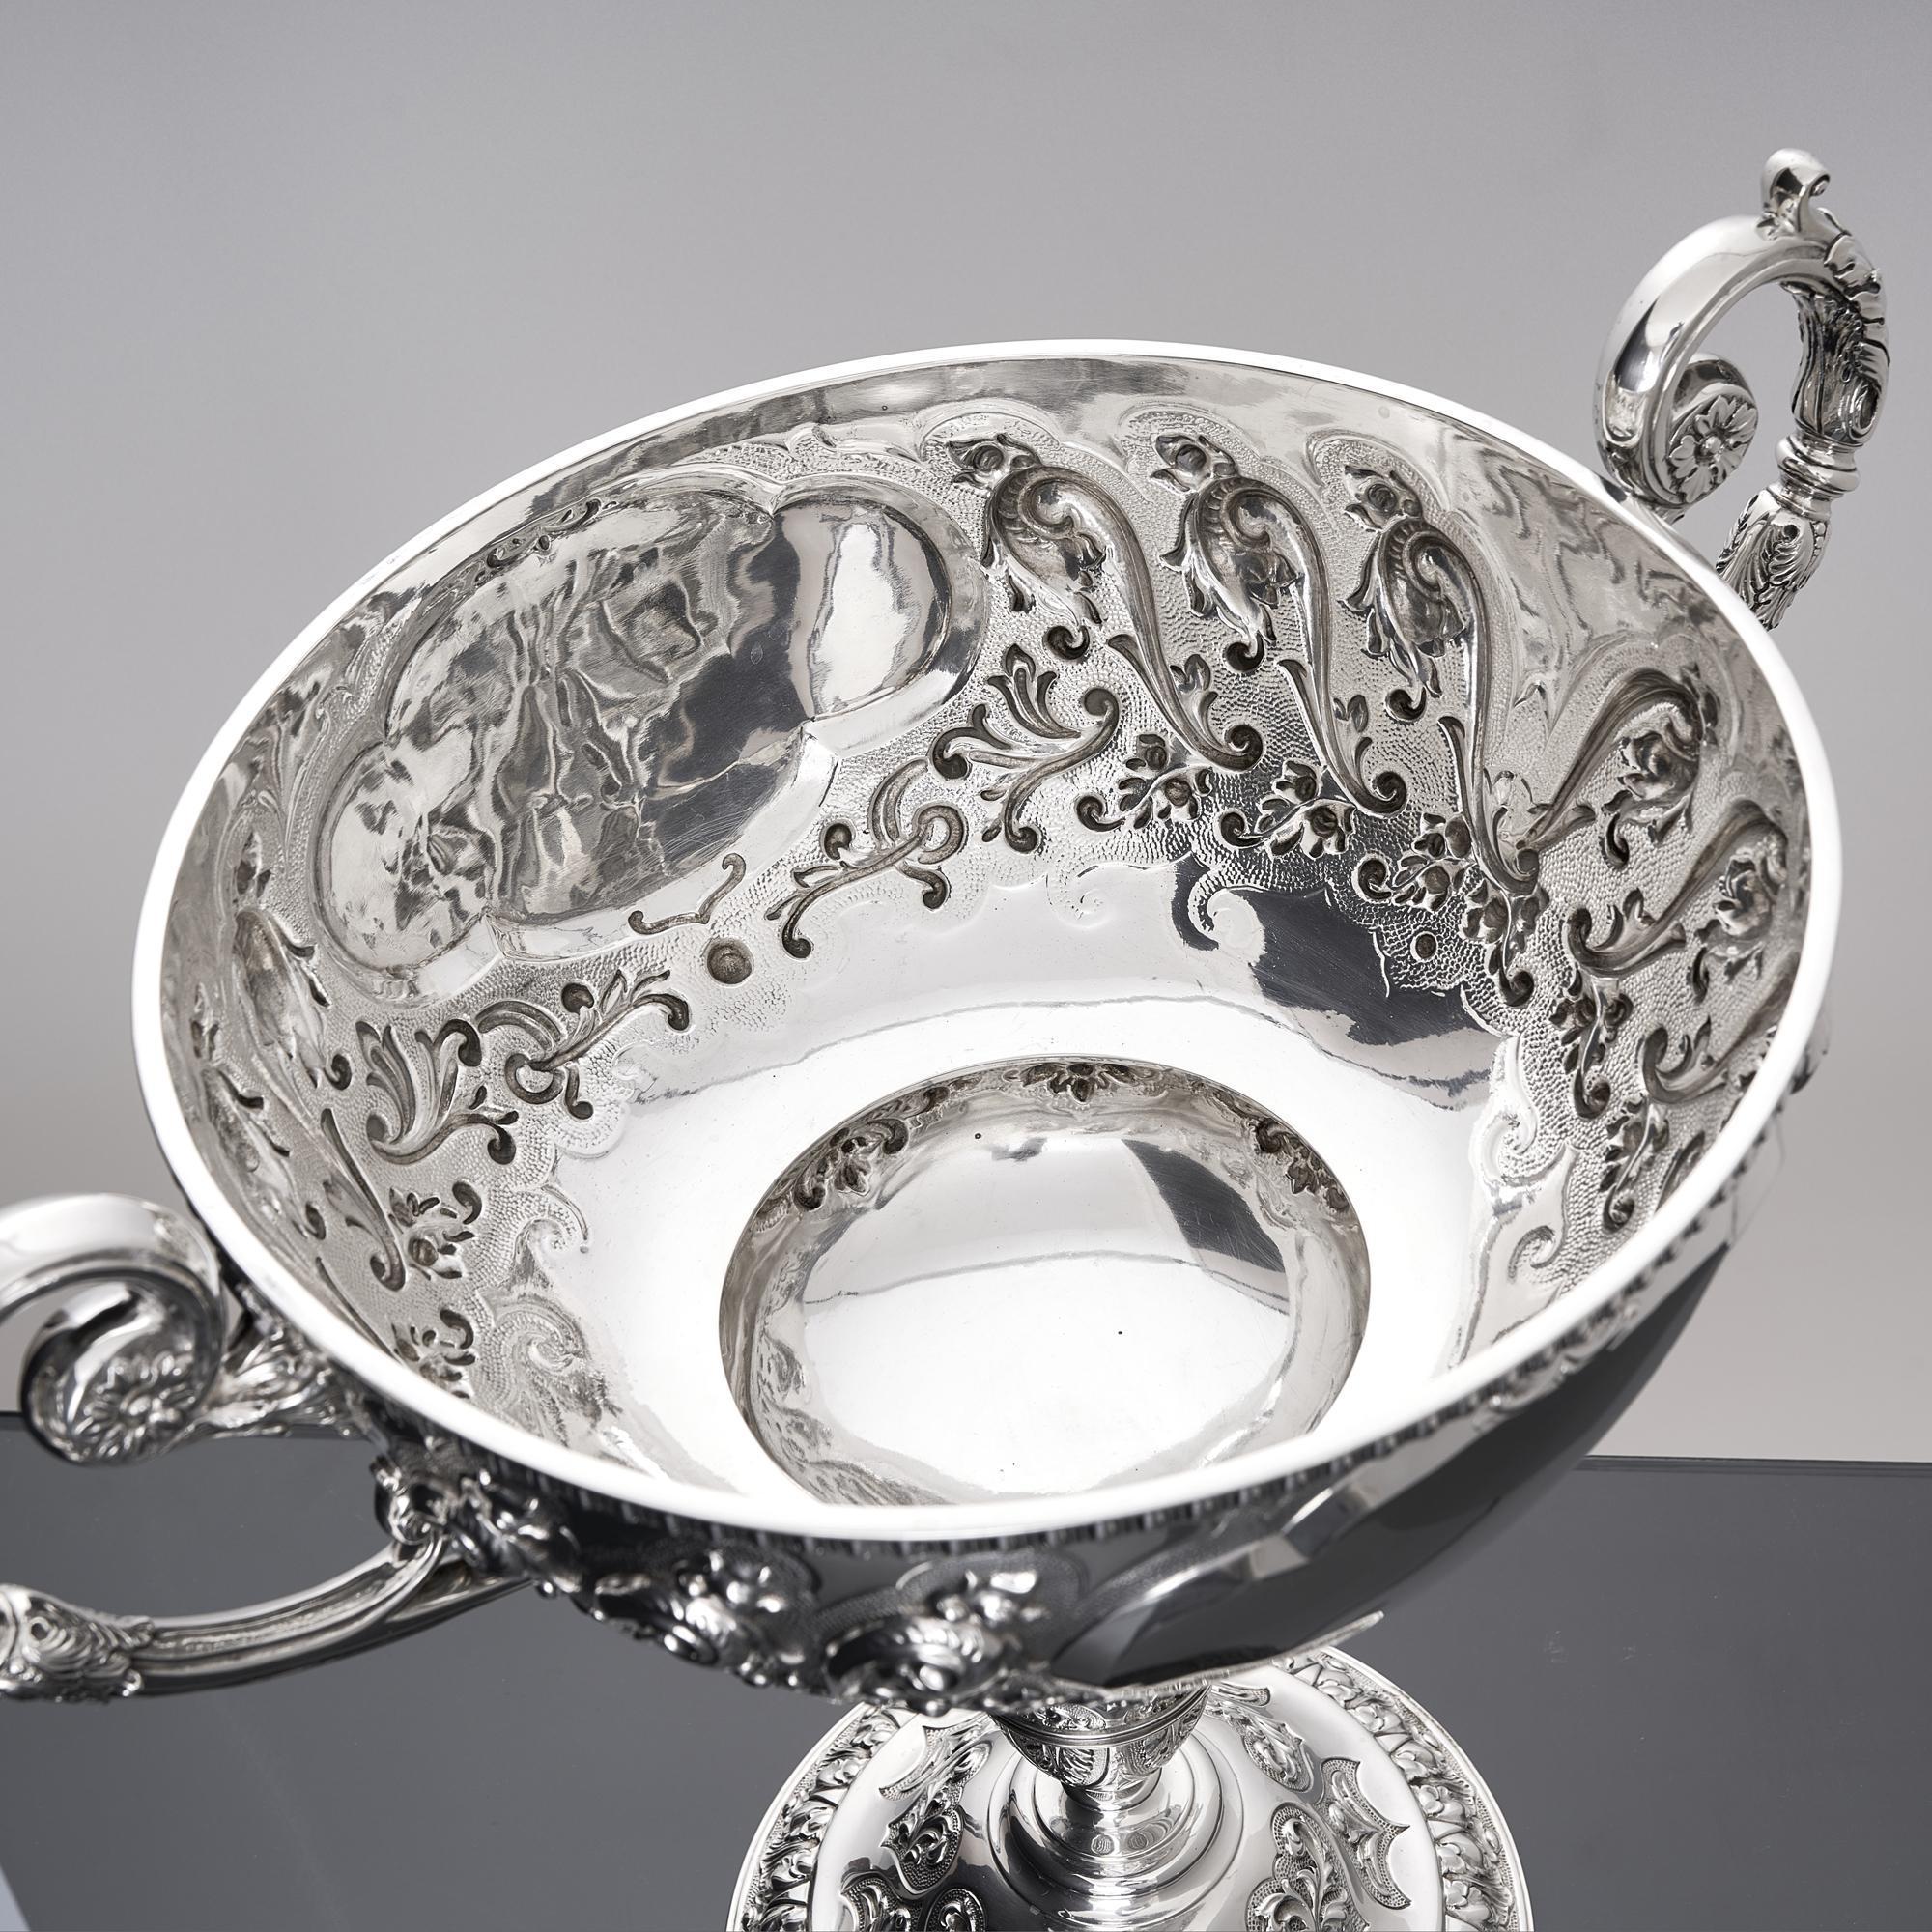 Two-handled antique sterling silver trophy comport 4